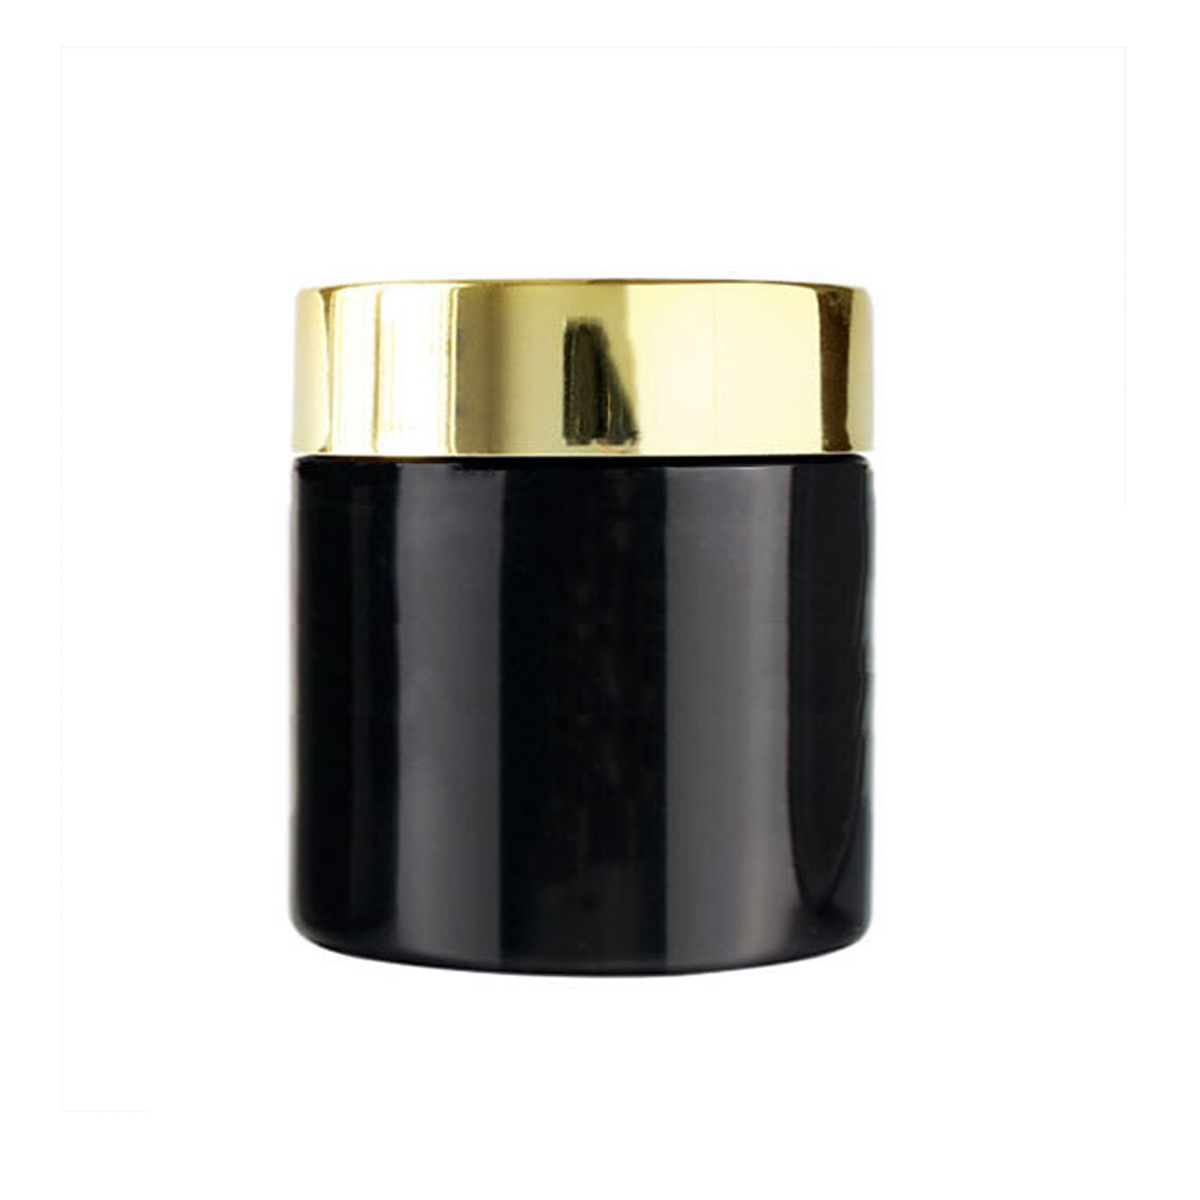 4oz black glass cosmetic cream jar with gold lid